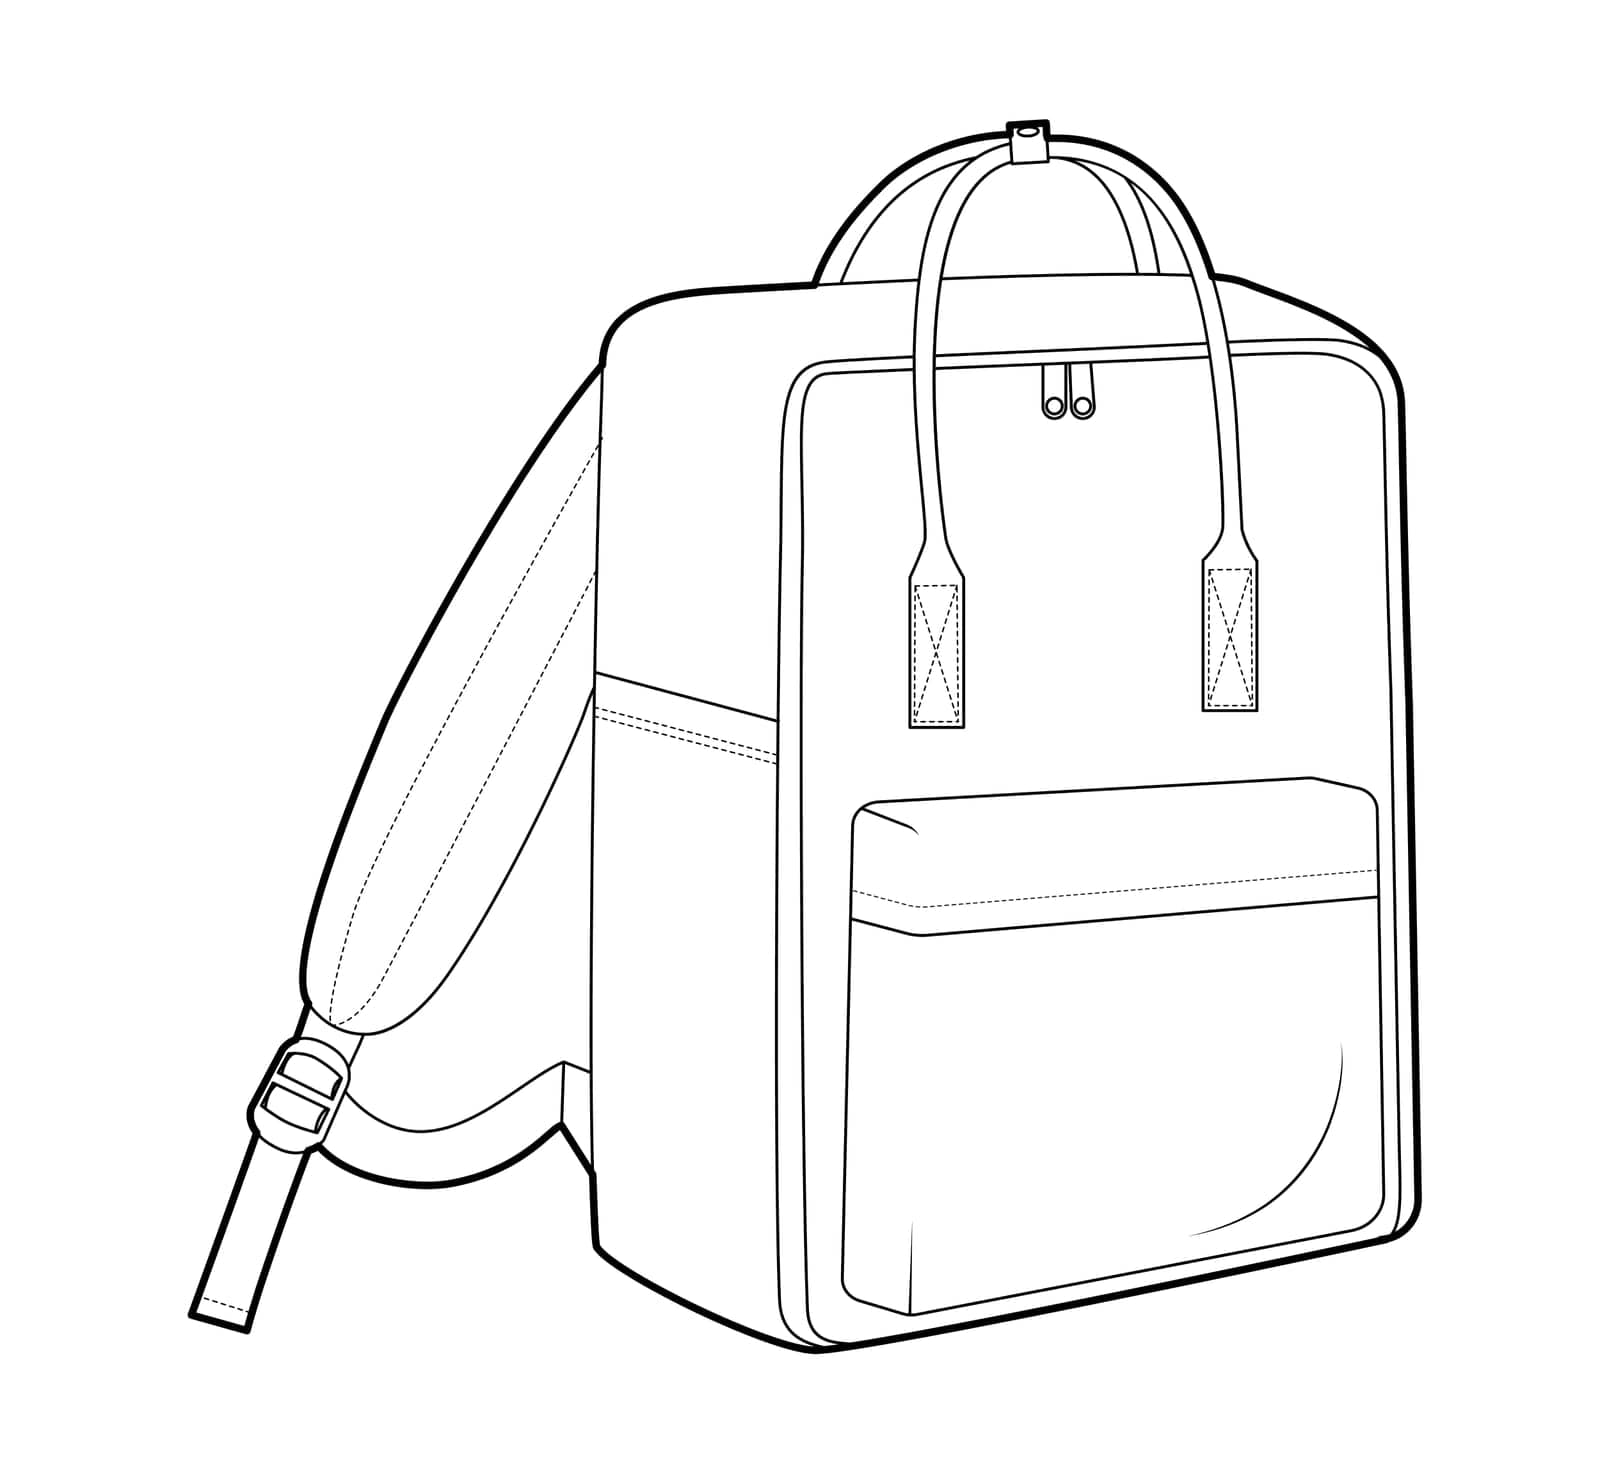 Adventure backpack silhouette bag with handle. Fashion accessory technical illustration. Vector schoolbag 3-4 view for Men, women, unisex style, flat handbag CAD mockup sketch outline isolated